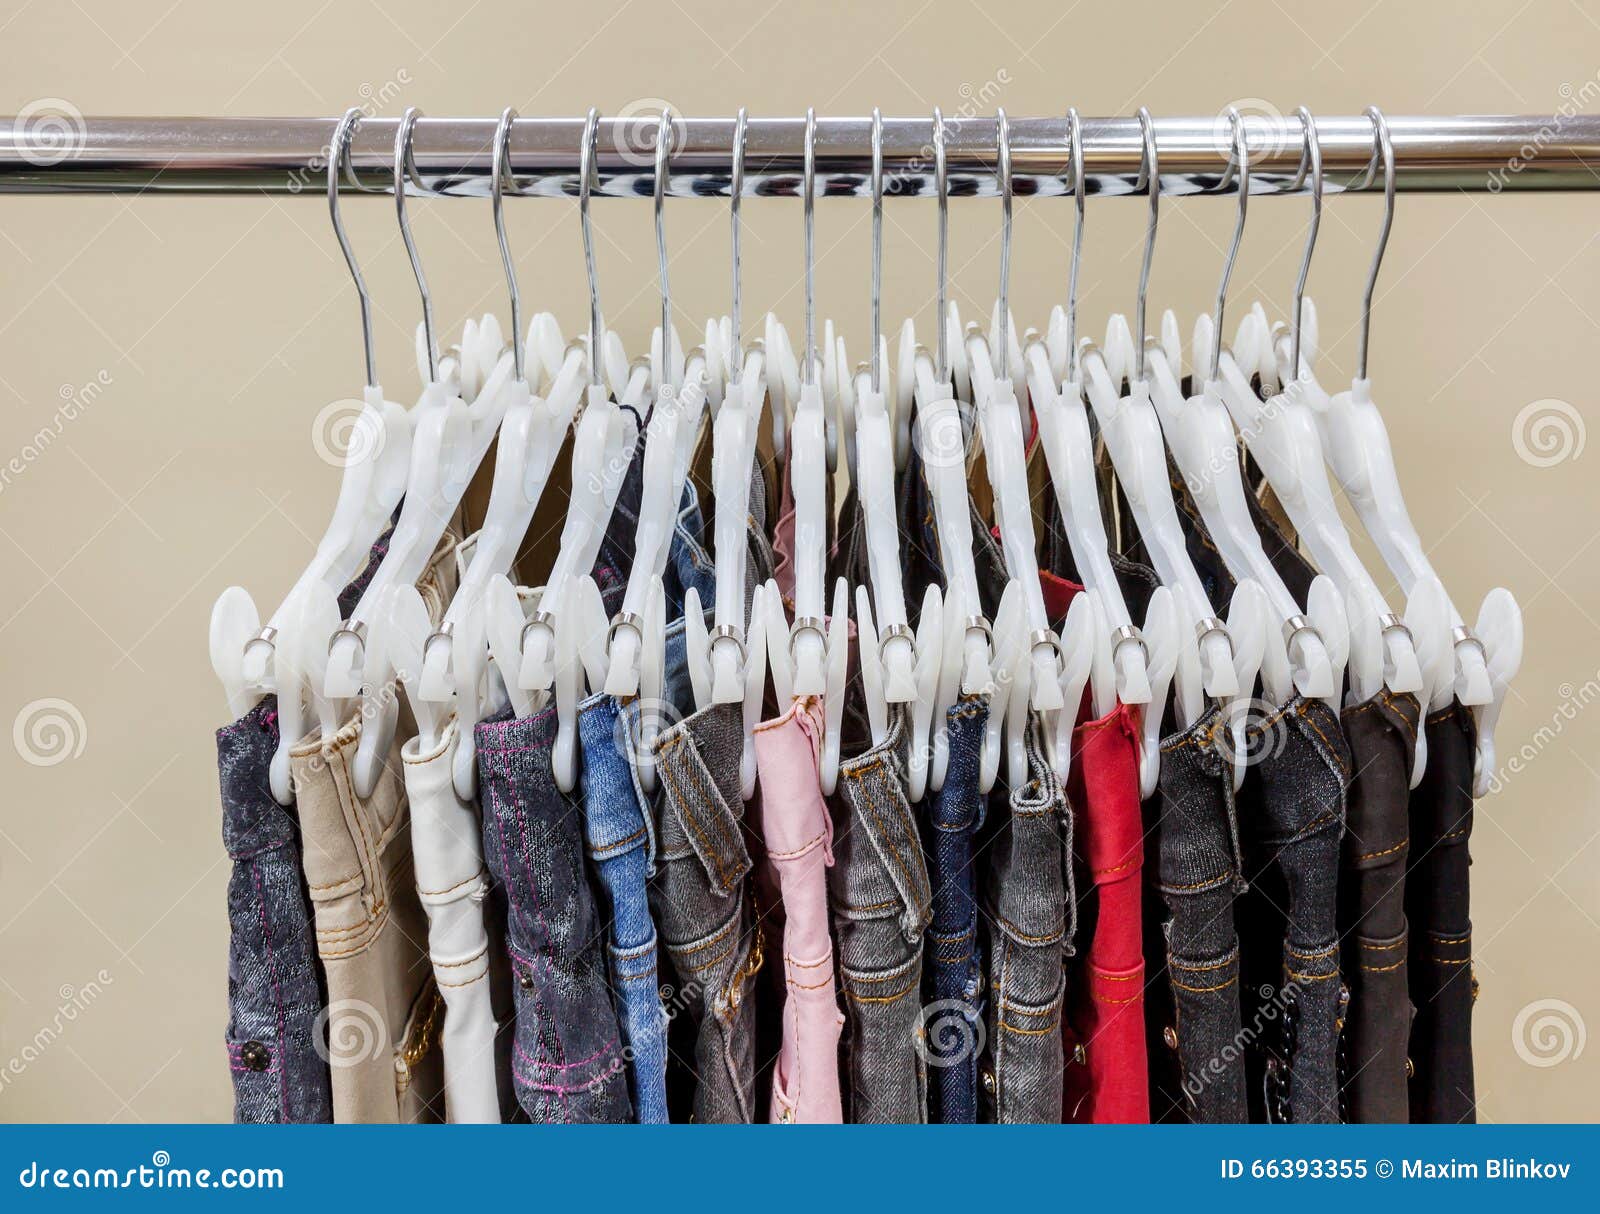 Jeans Hanging in Row on Hanger Stock Image - Image of material, pants ...